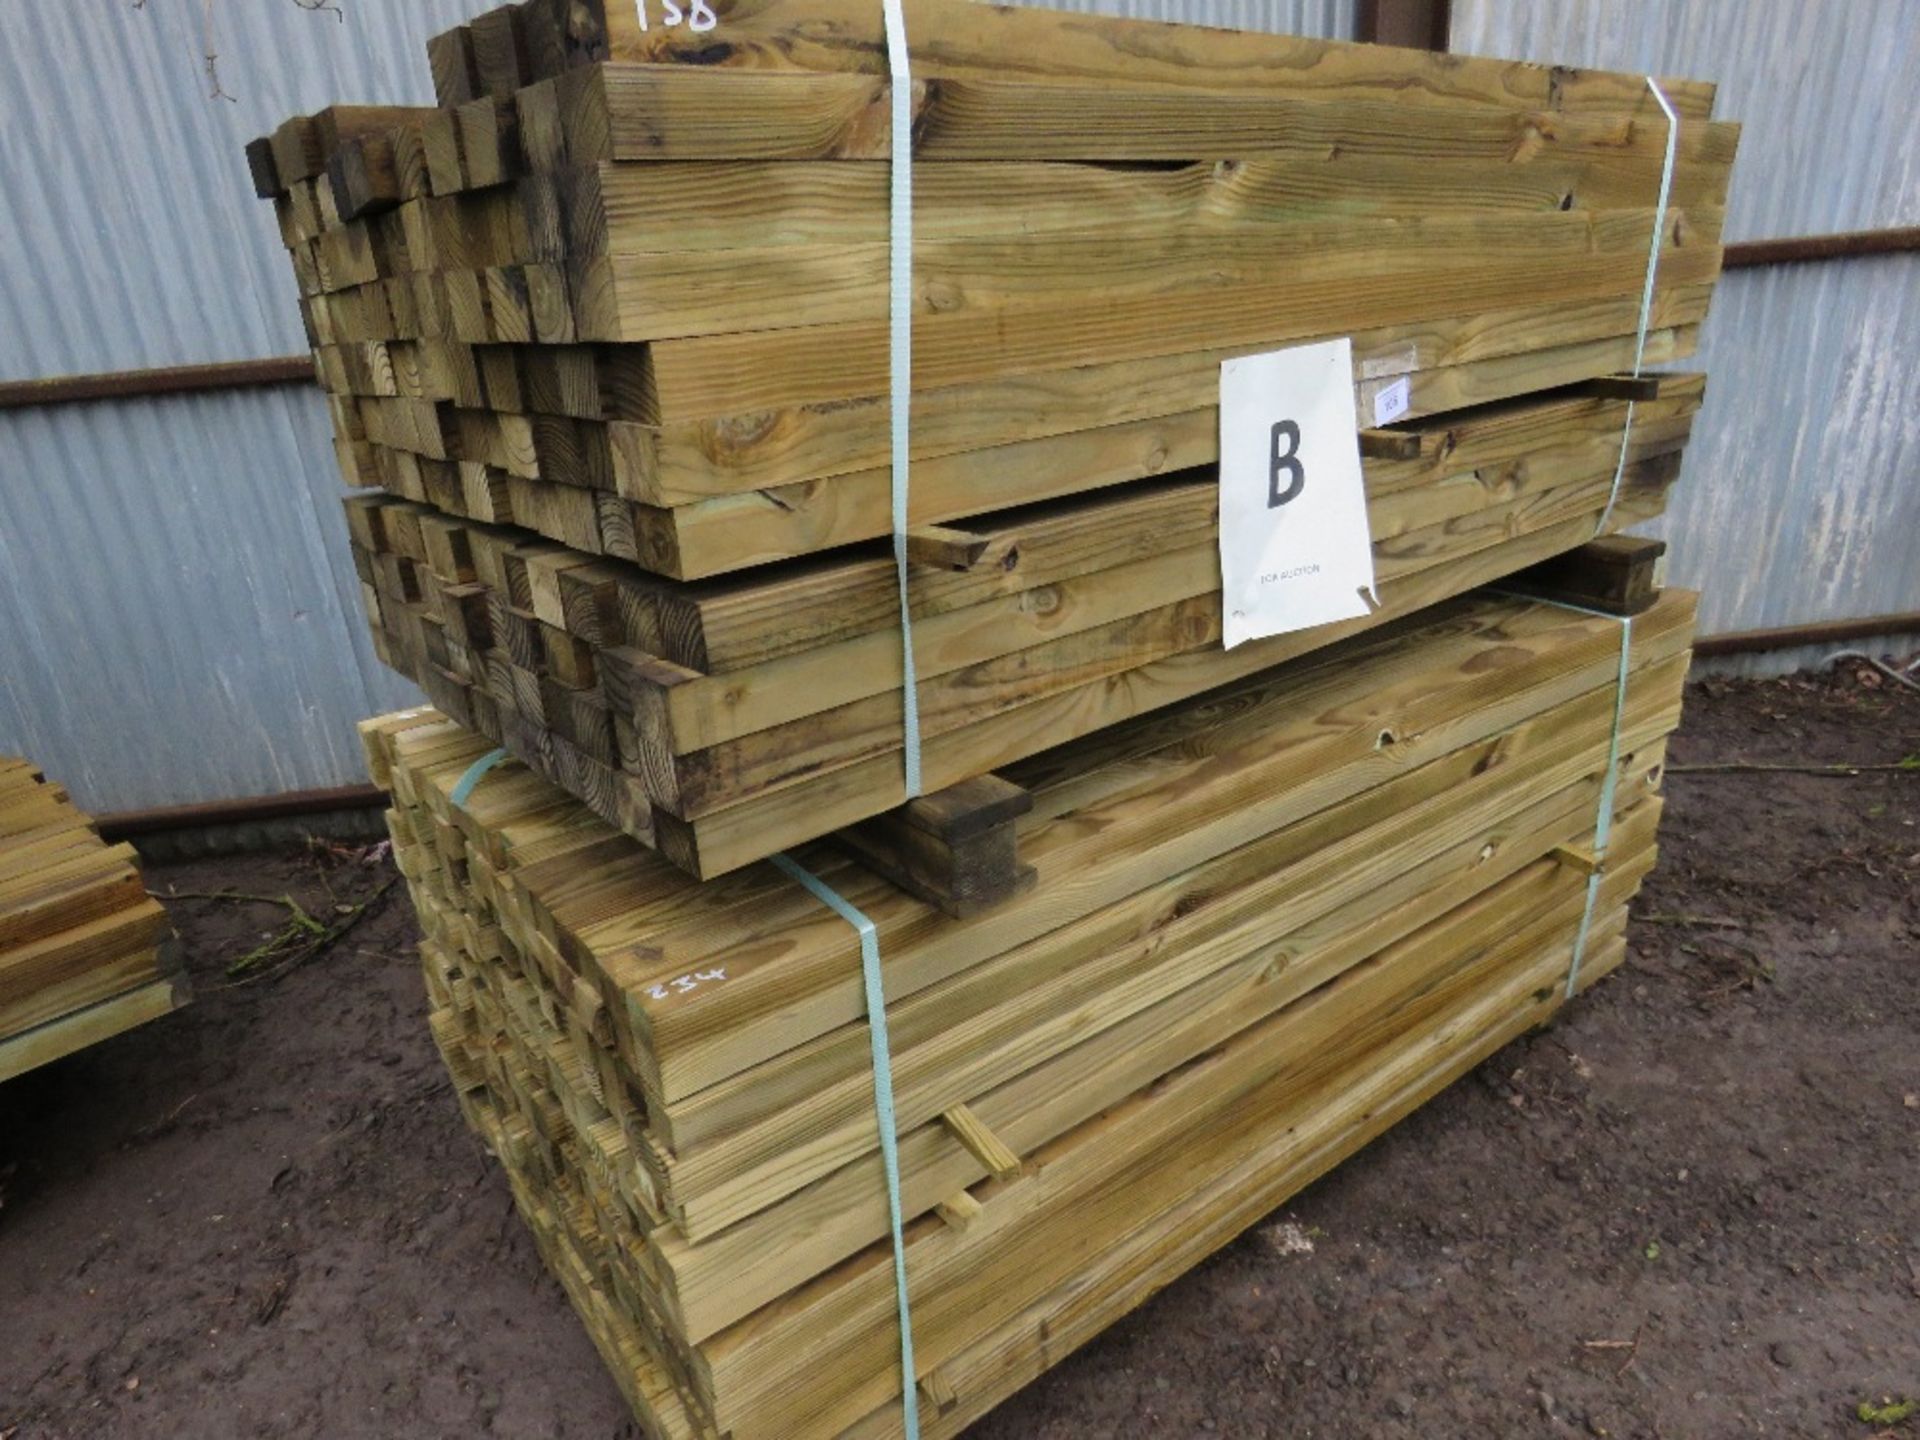 2 LARGE PACKS OF TIMBER POSTS APPROX. 372 1.8MX5.5CM